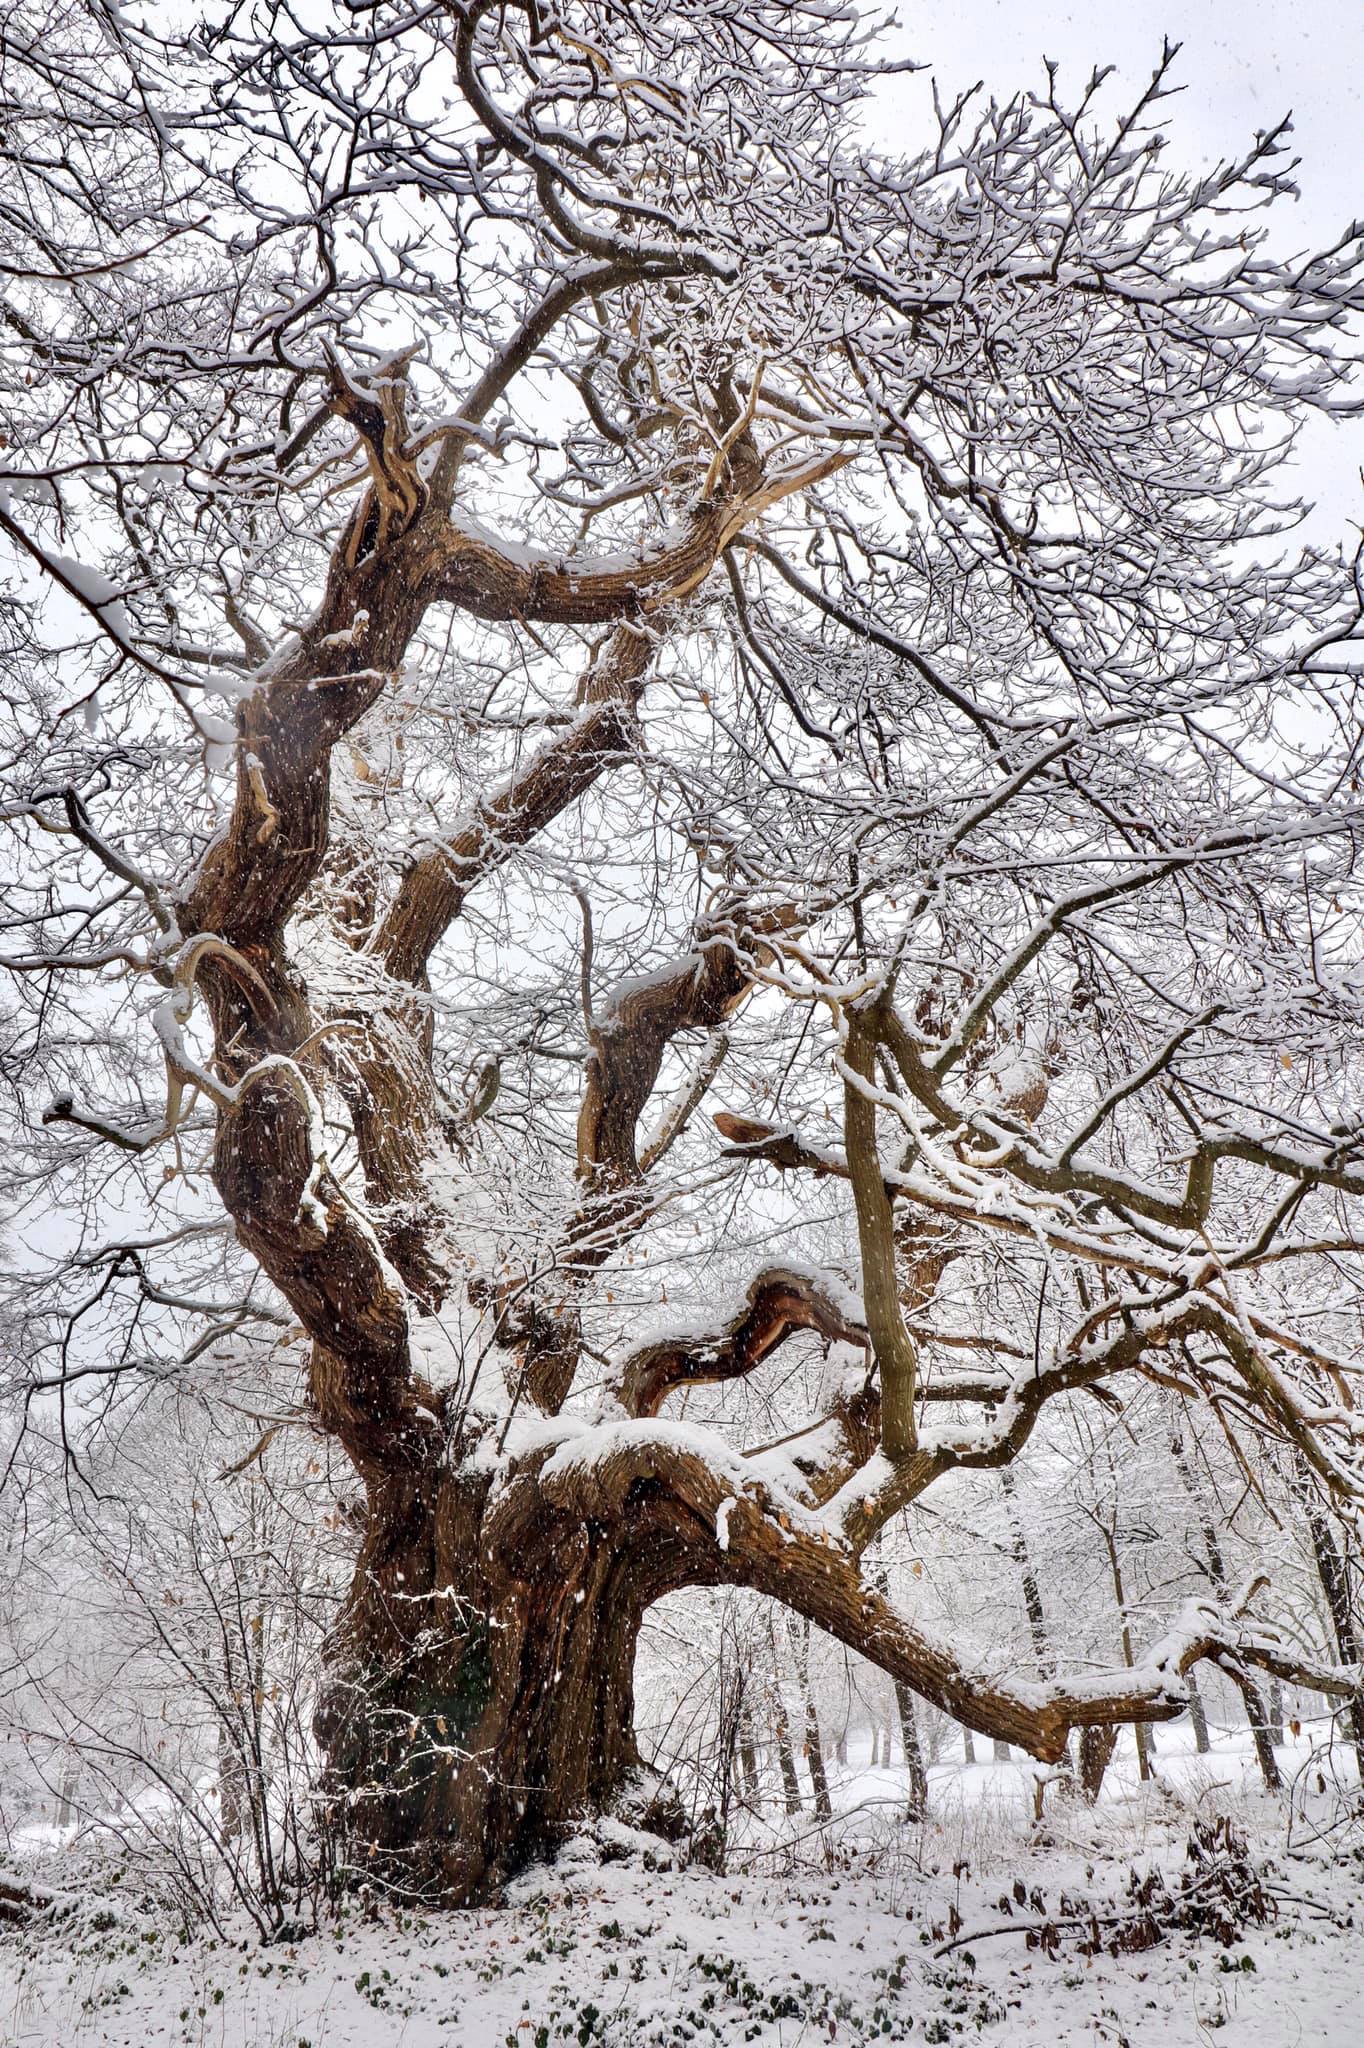 Stephen Smith captured this beautiful tree covered in snow